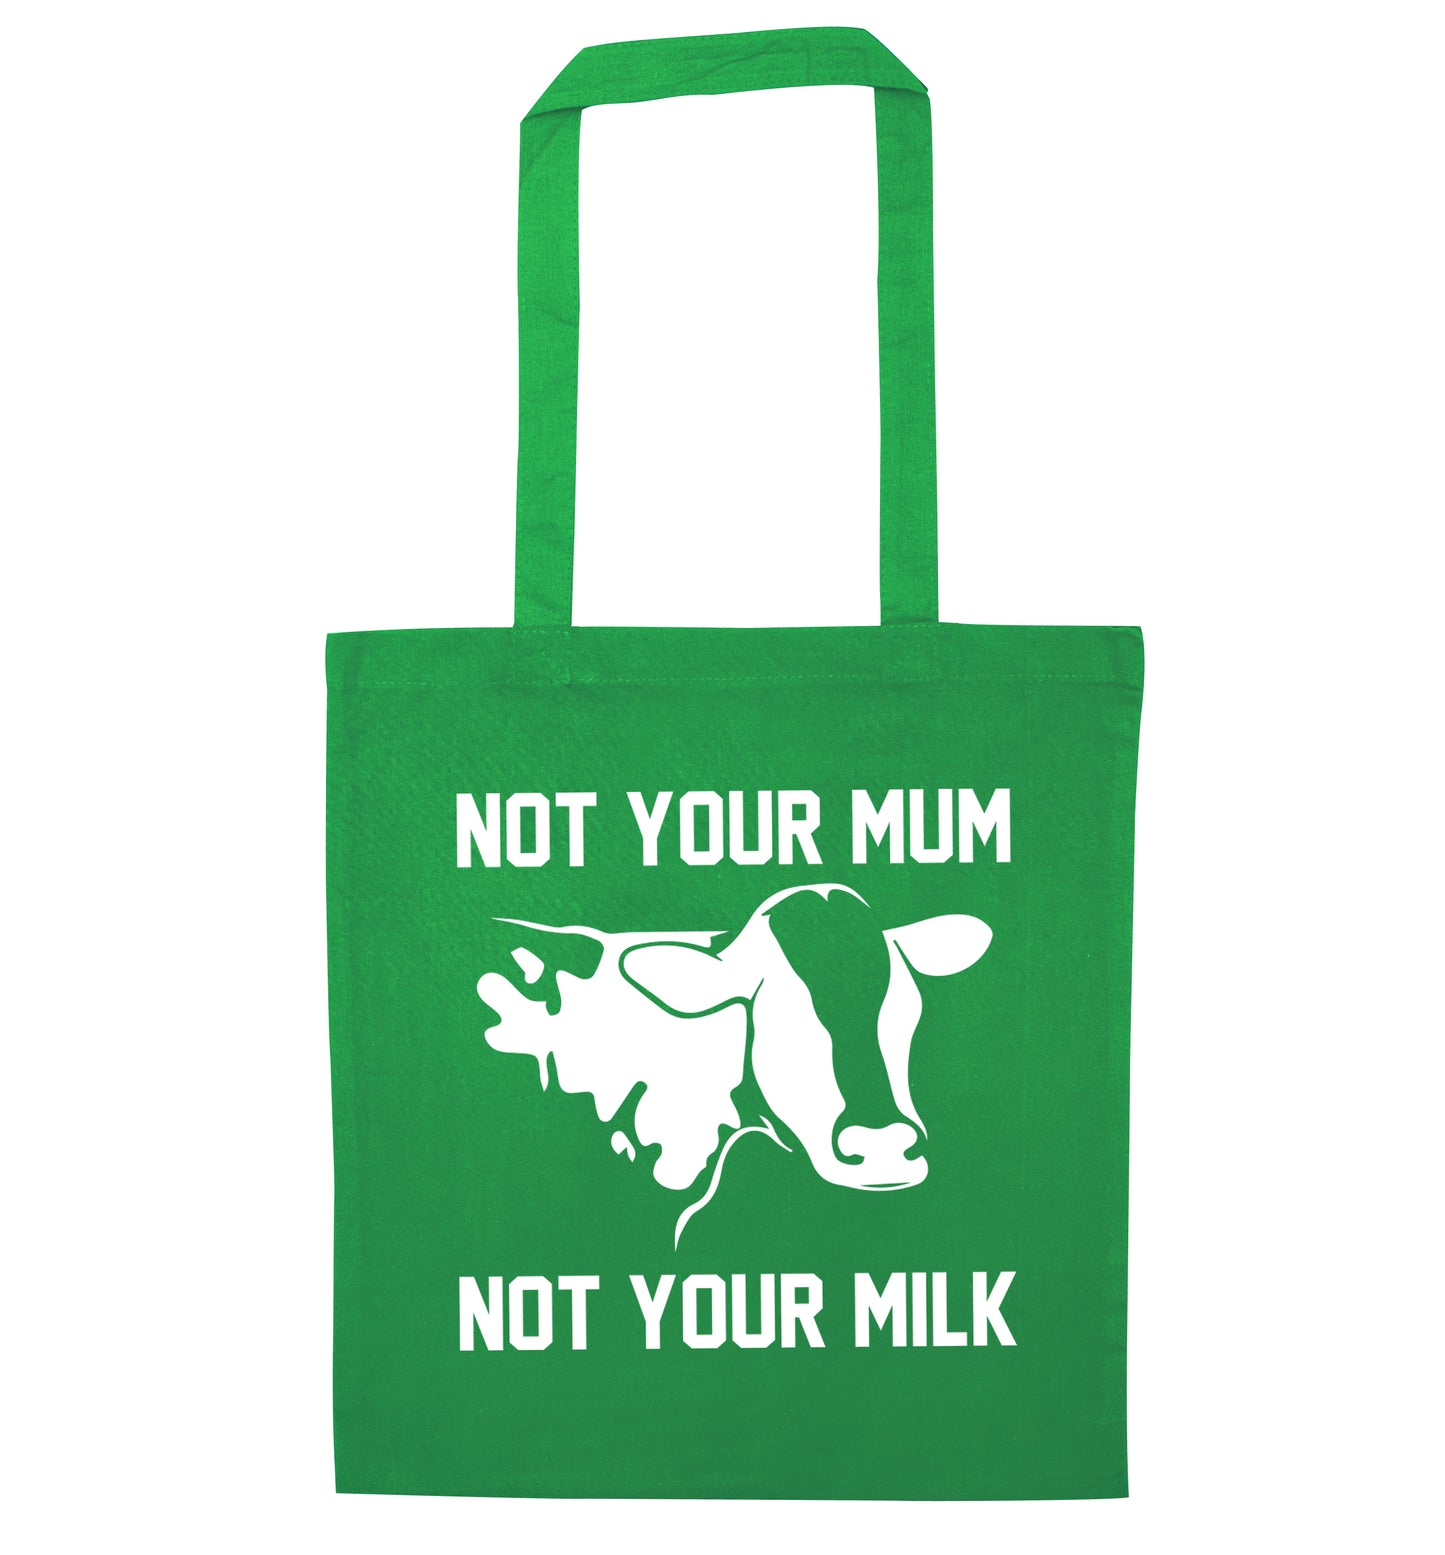 Not your mum not your milk green tote bag